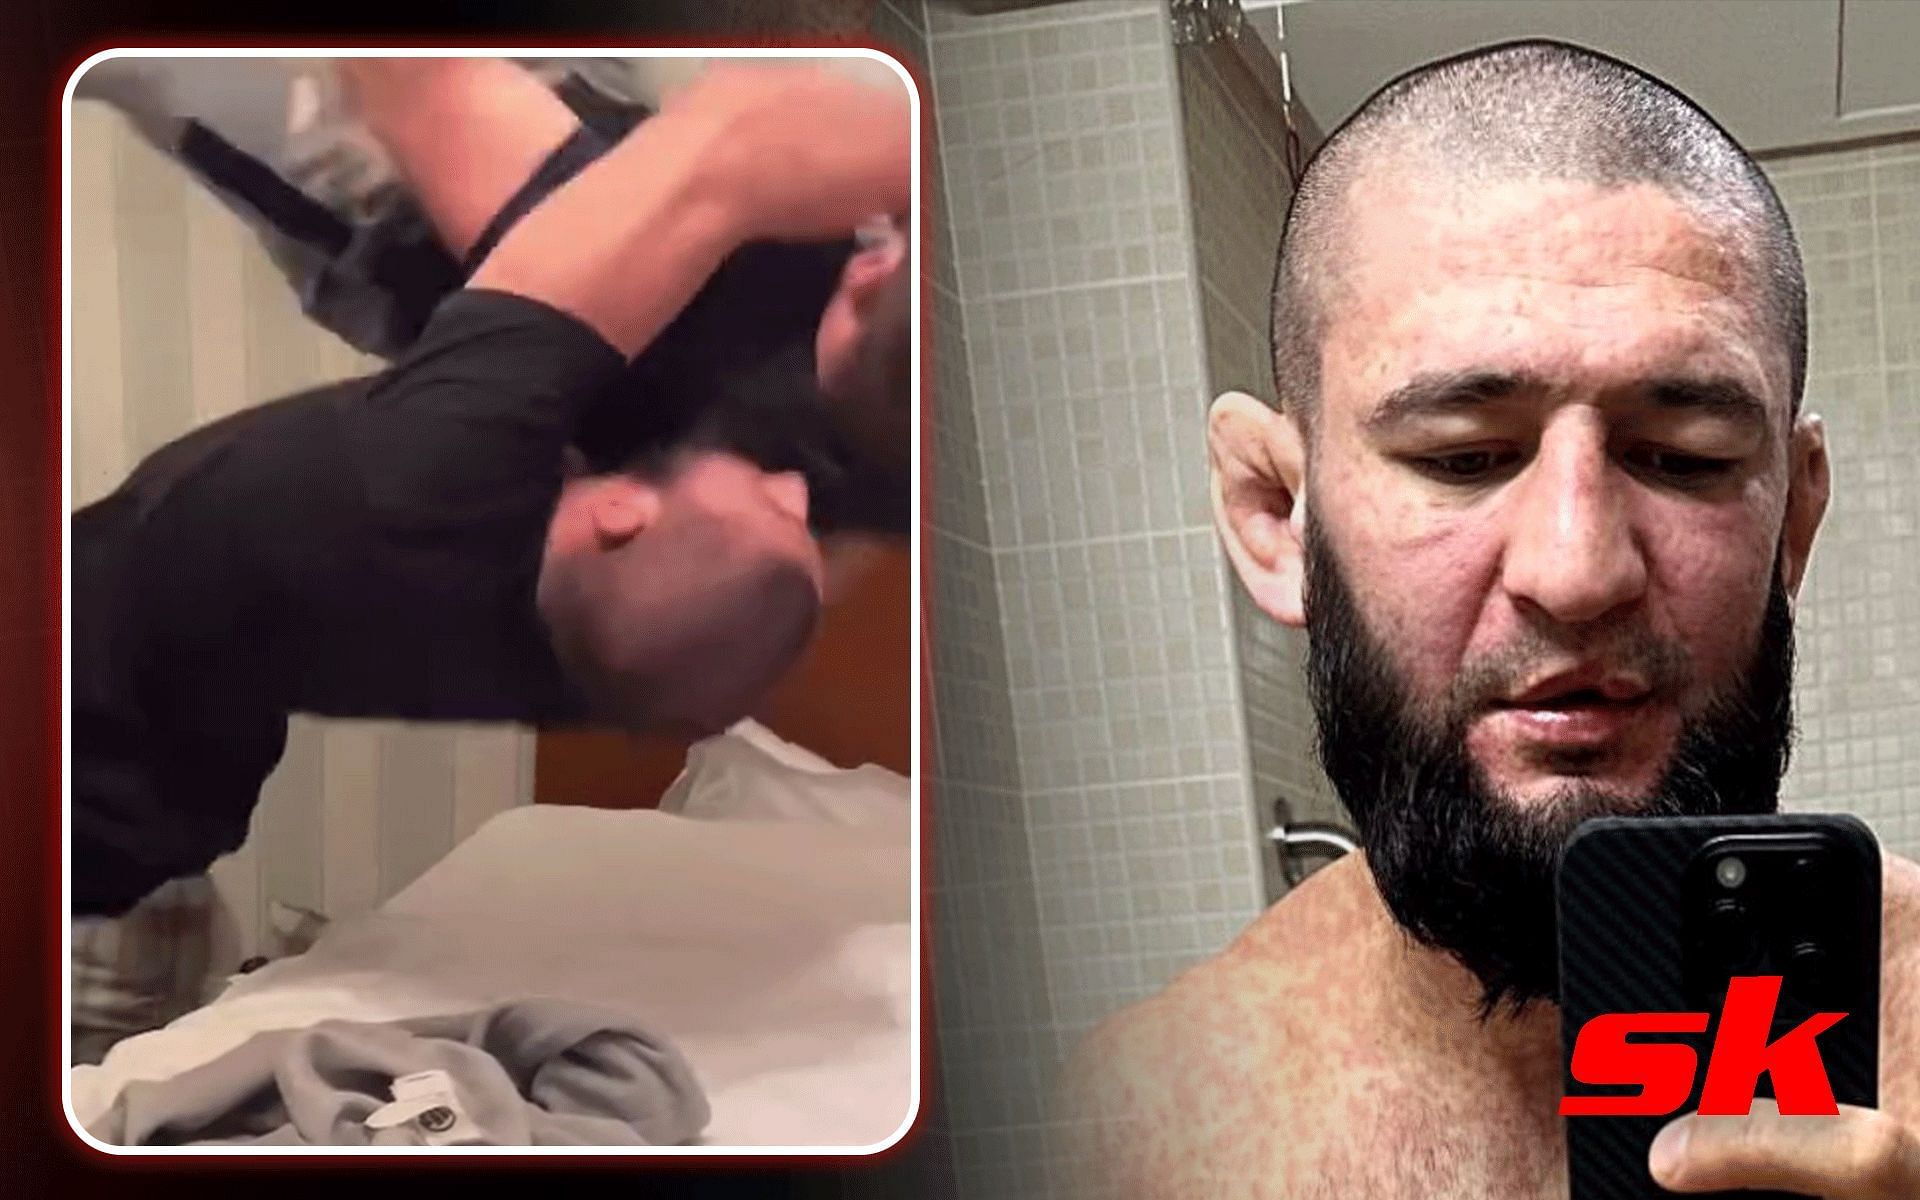 Khamzat Chimaev shared a video of body slamming a fighter within a day of deleting photos of his illness